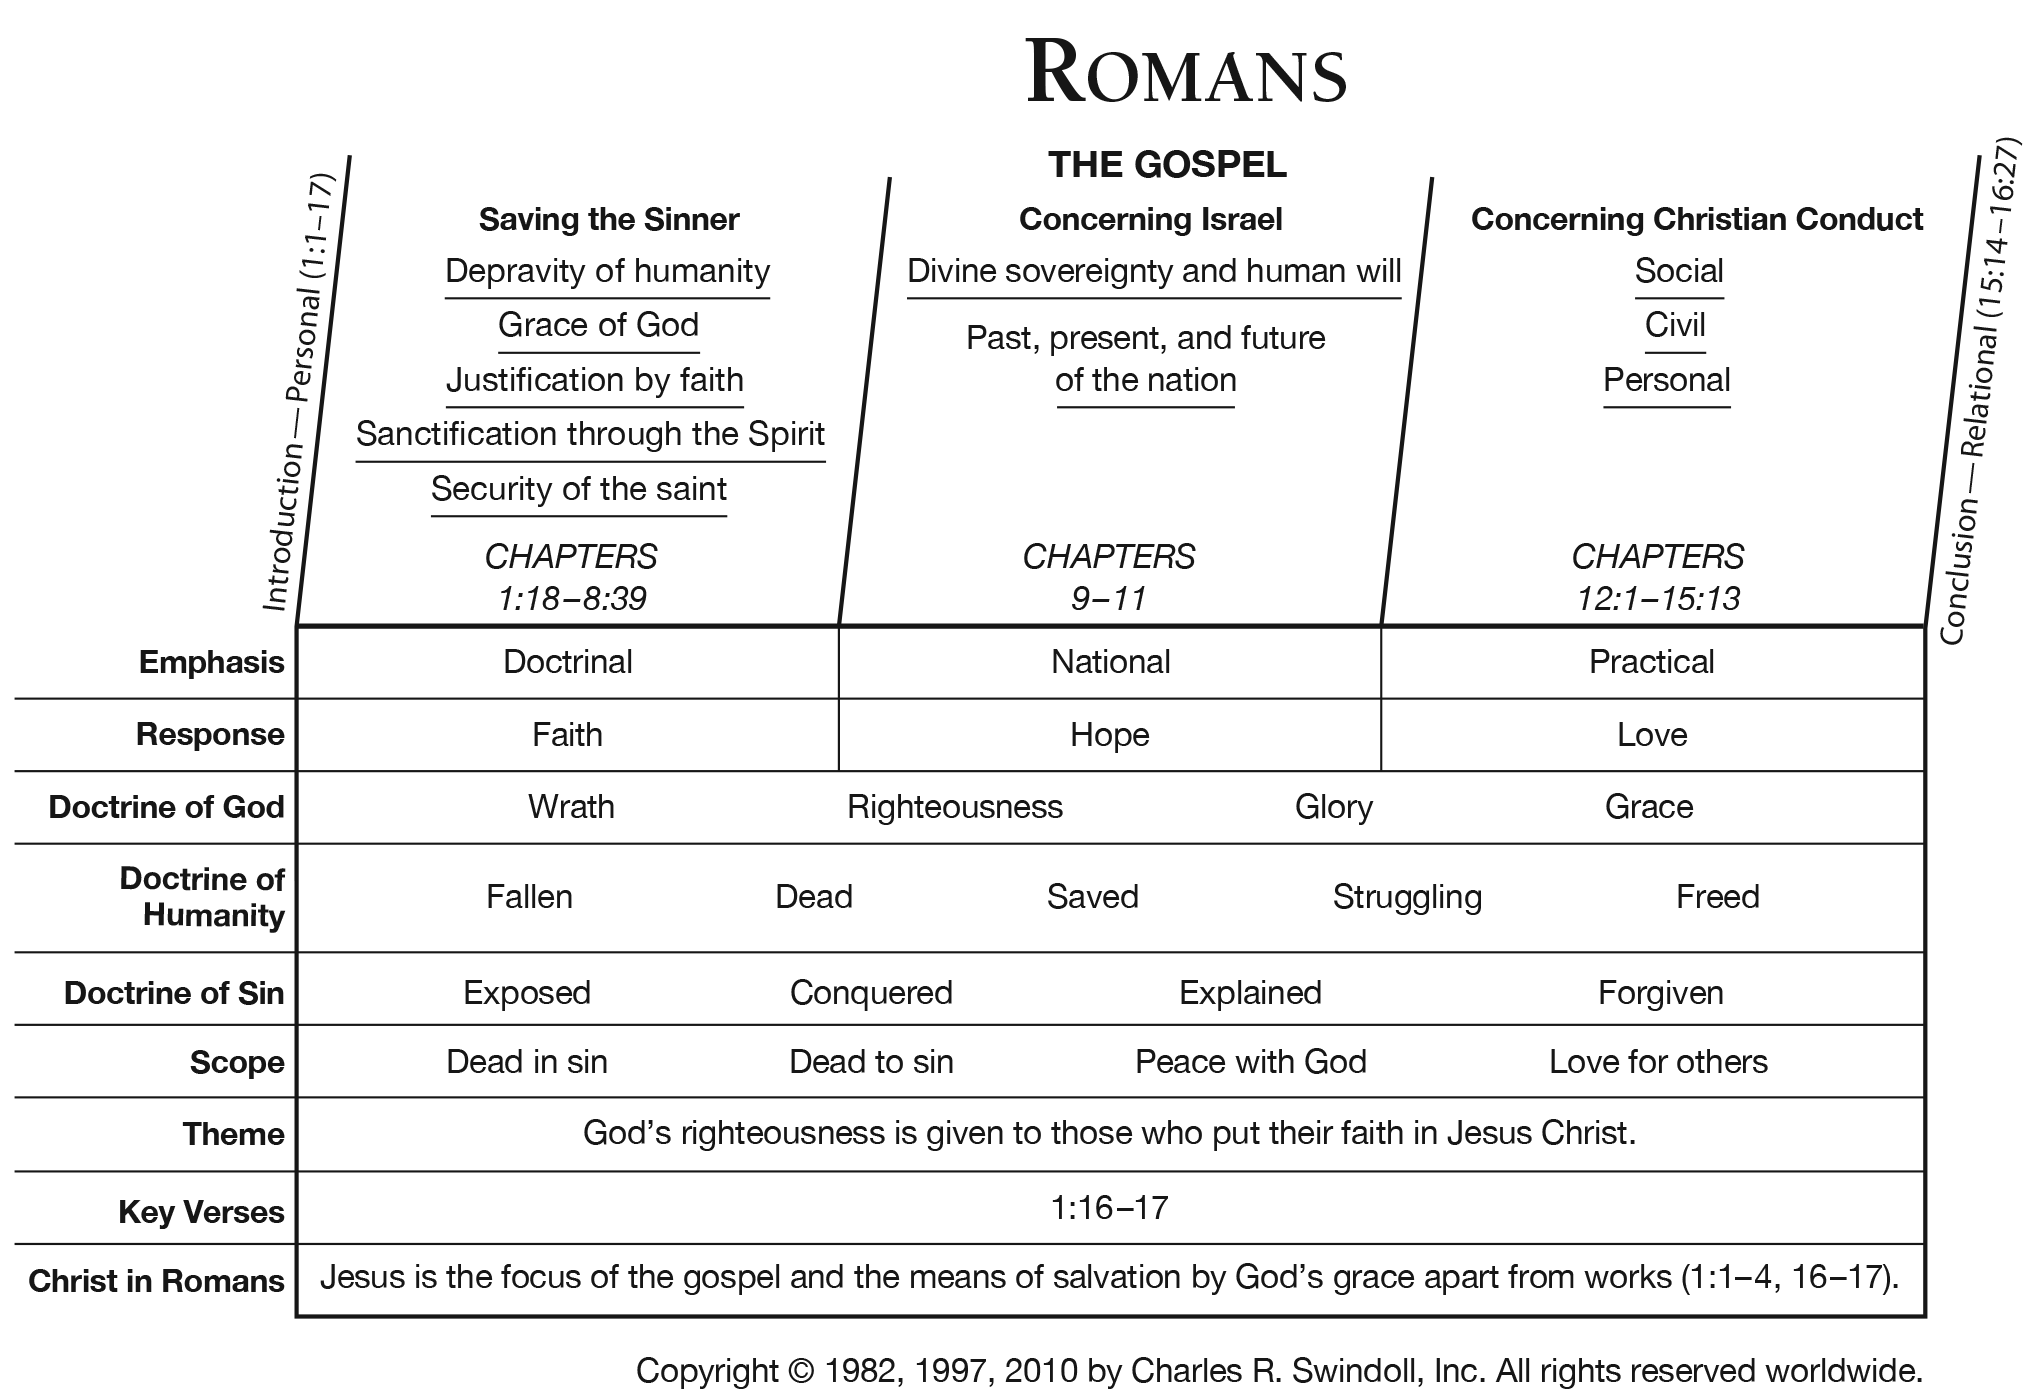 Introduction | The Romans